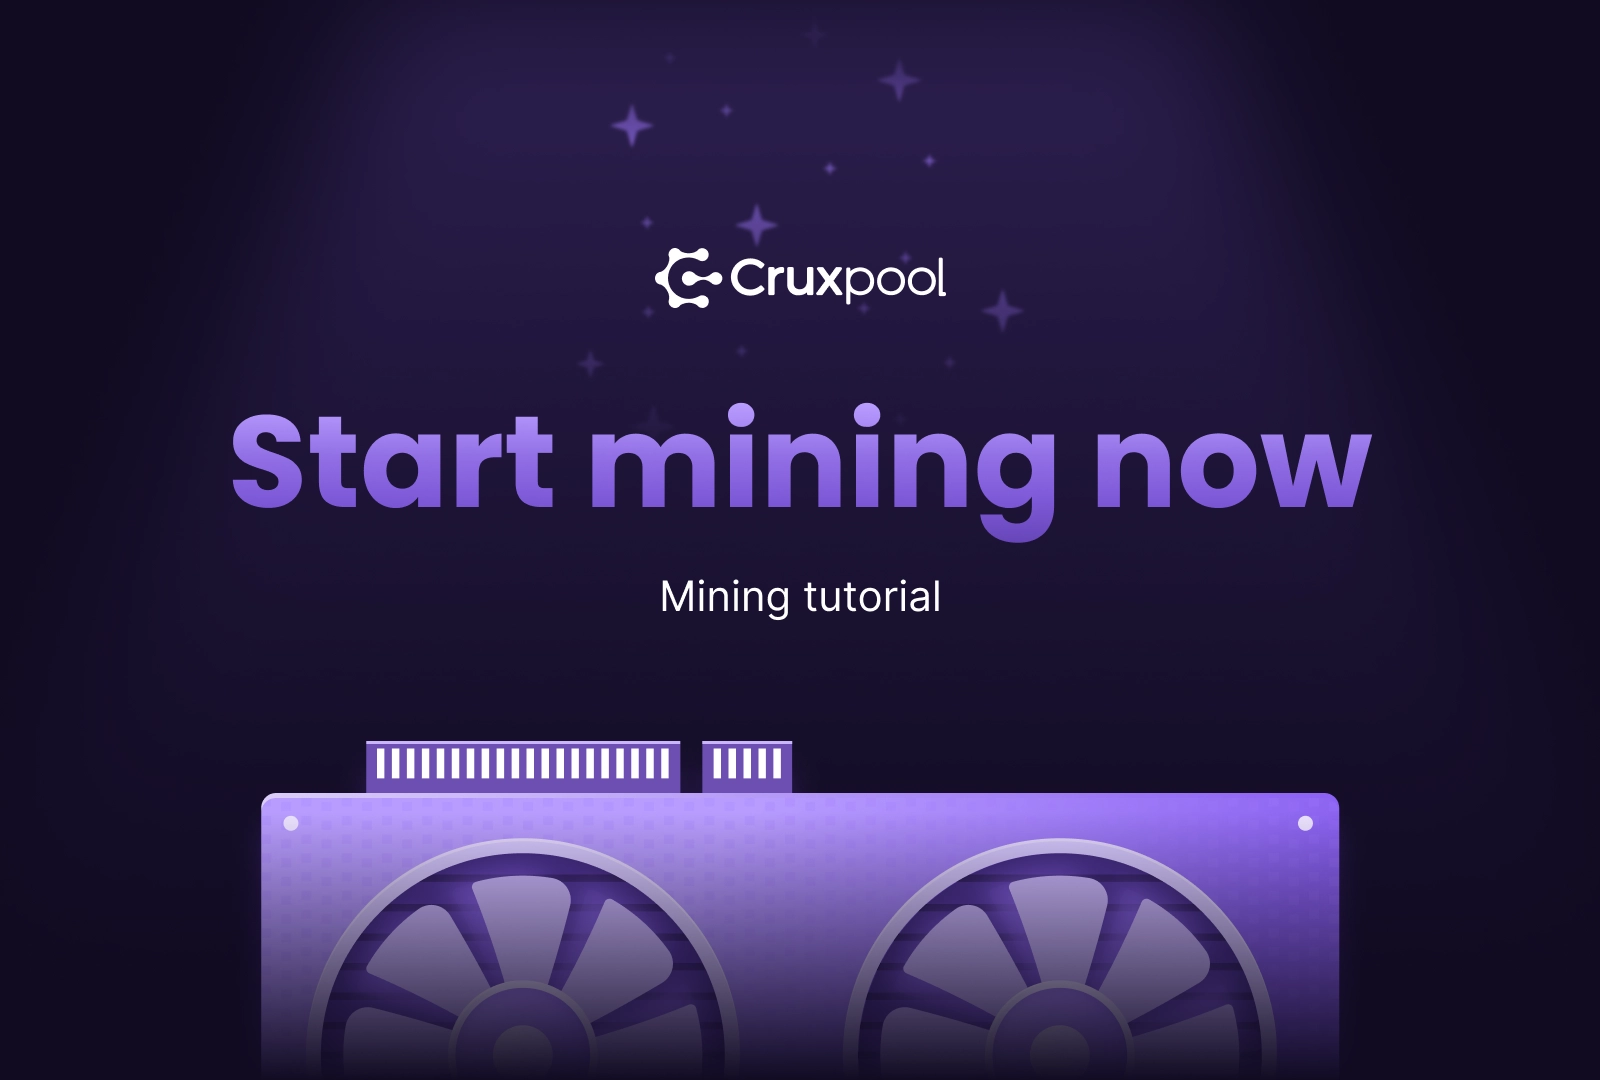 How to start mining?